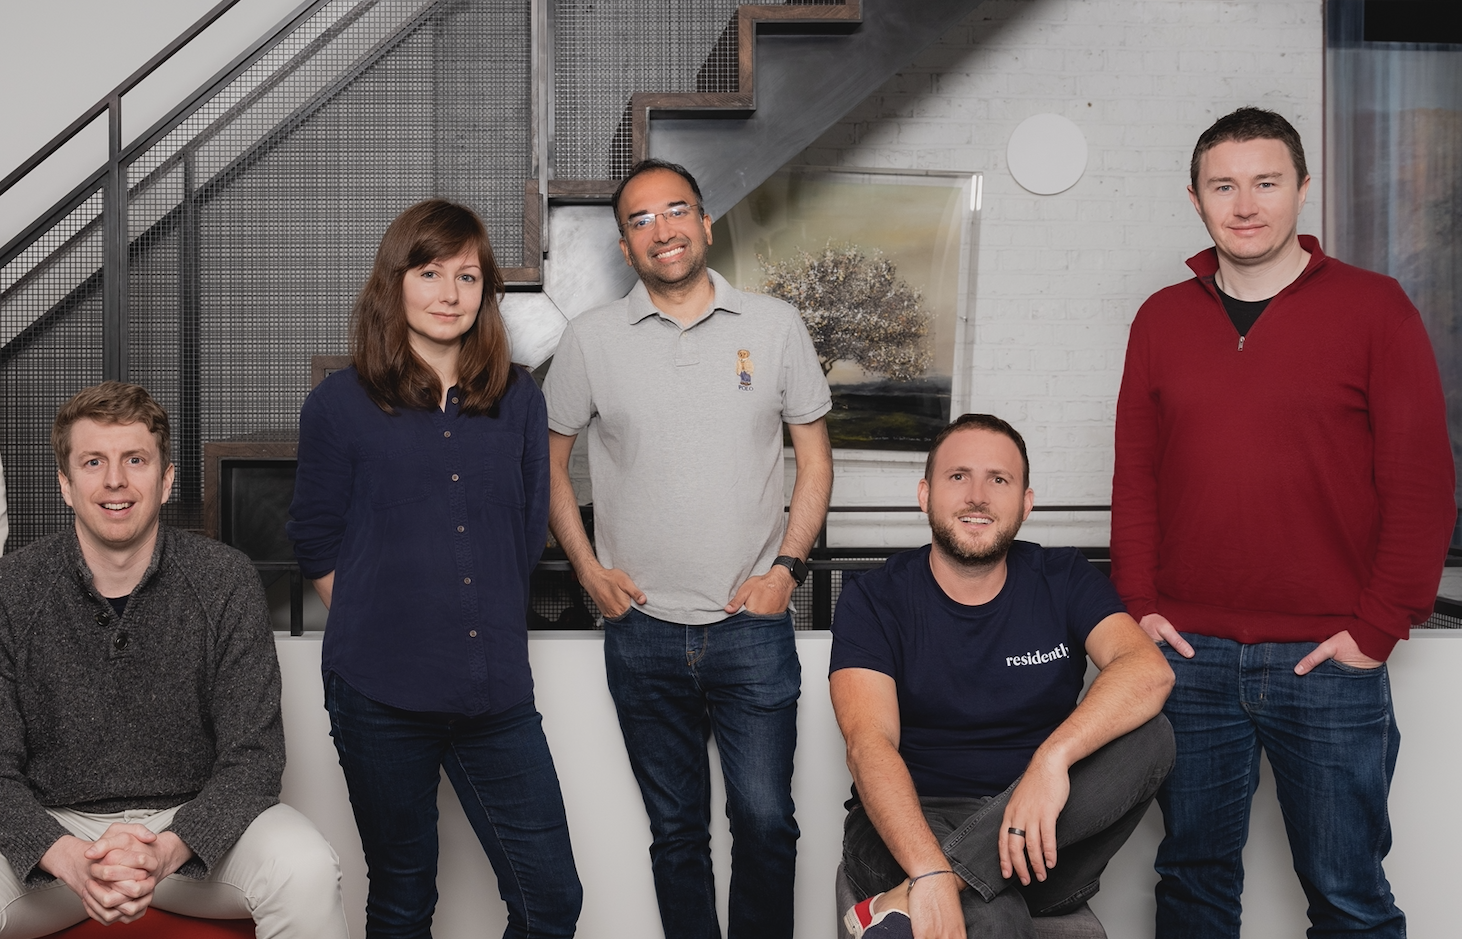 UK-based proptech startup Residently lands €5.2 million to transform the rental experience